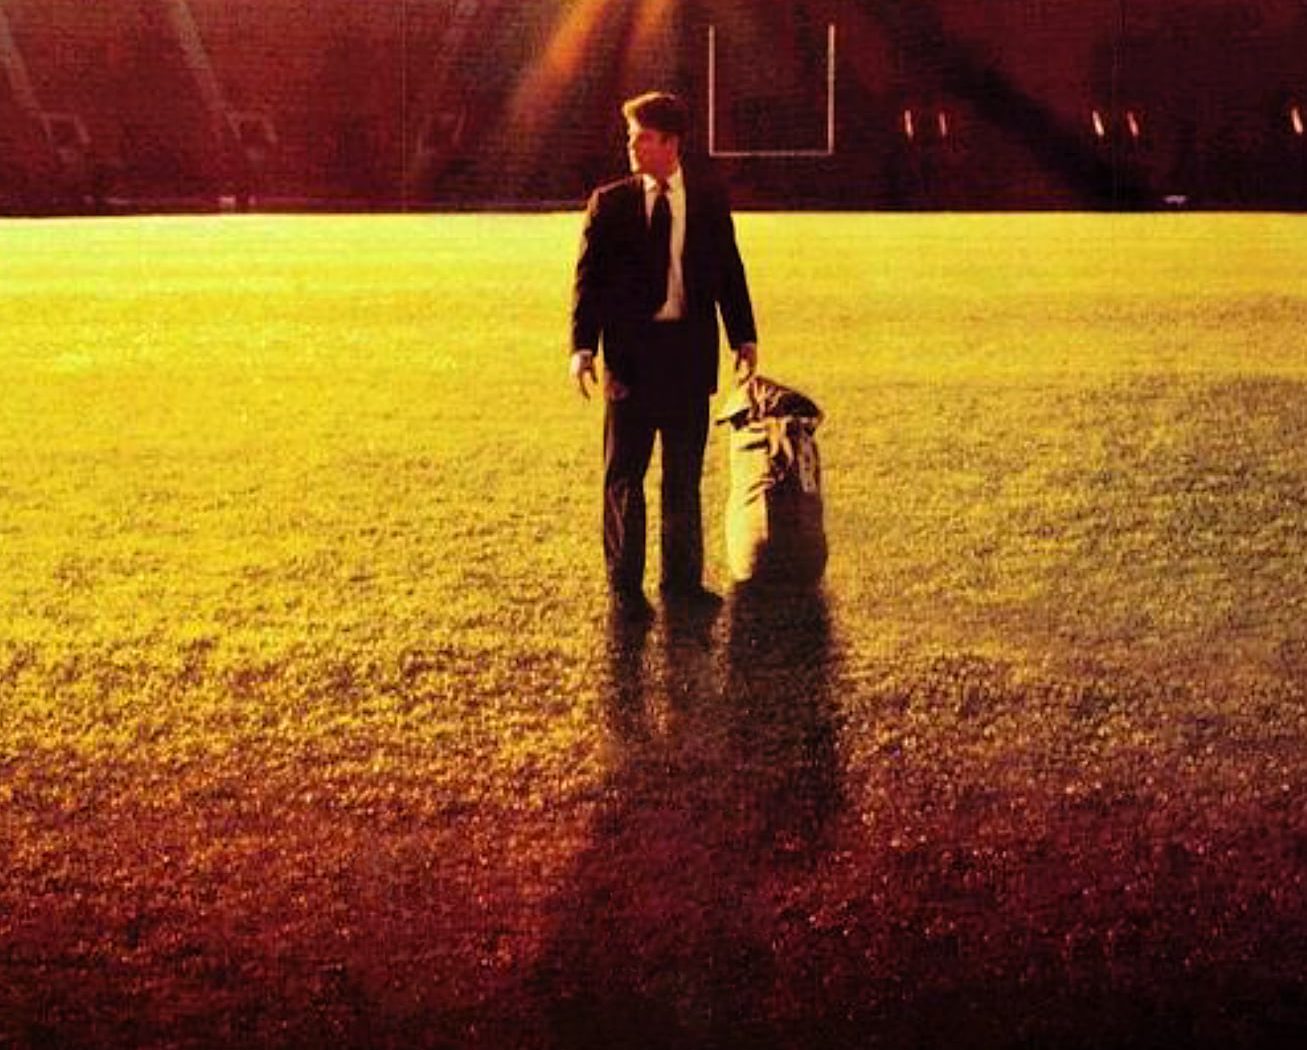 Poster for the movie "Rudy"